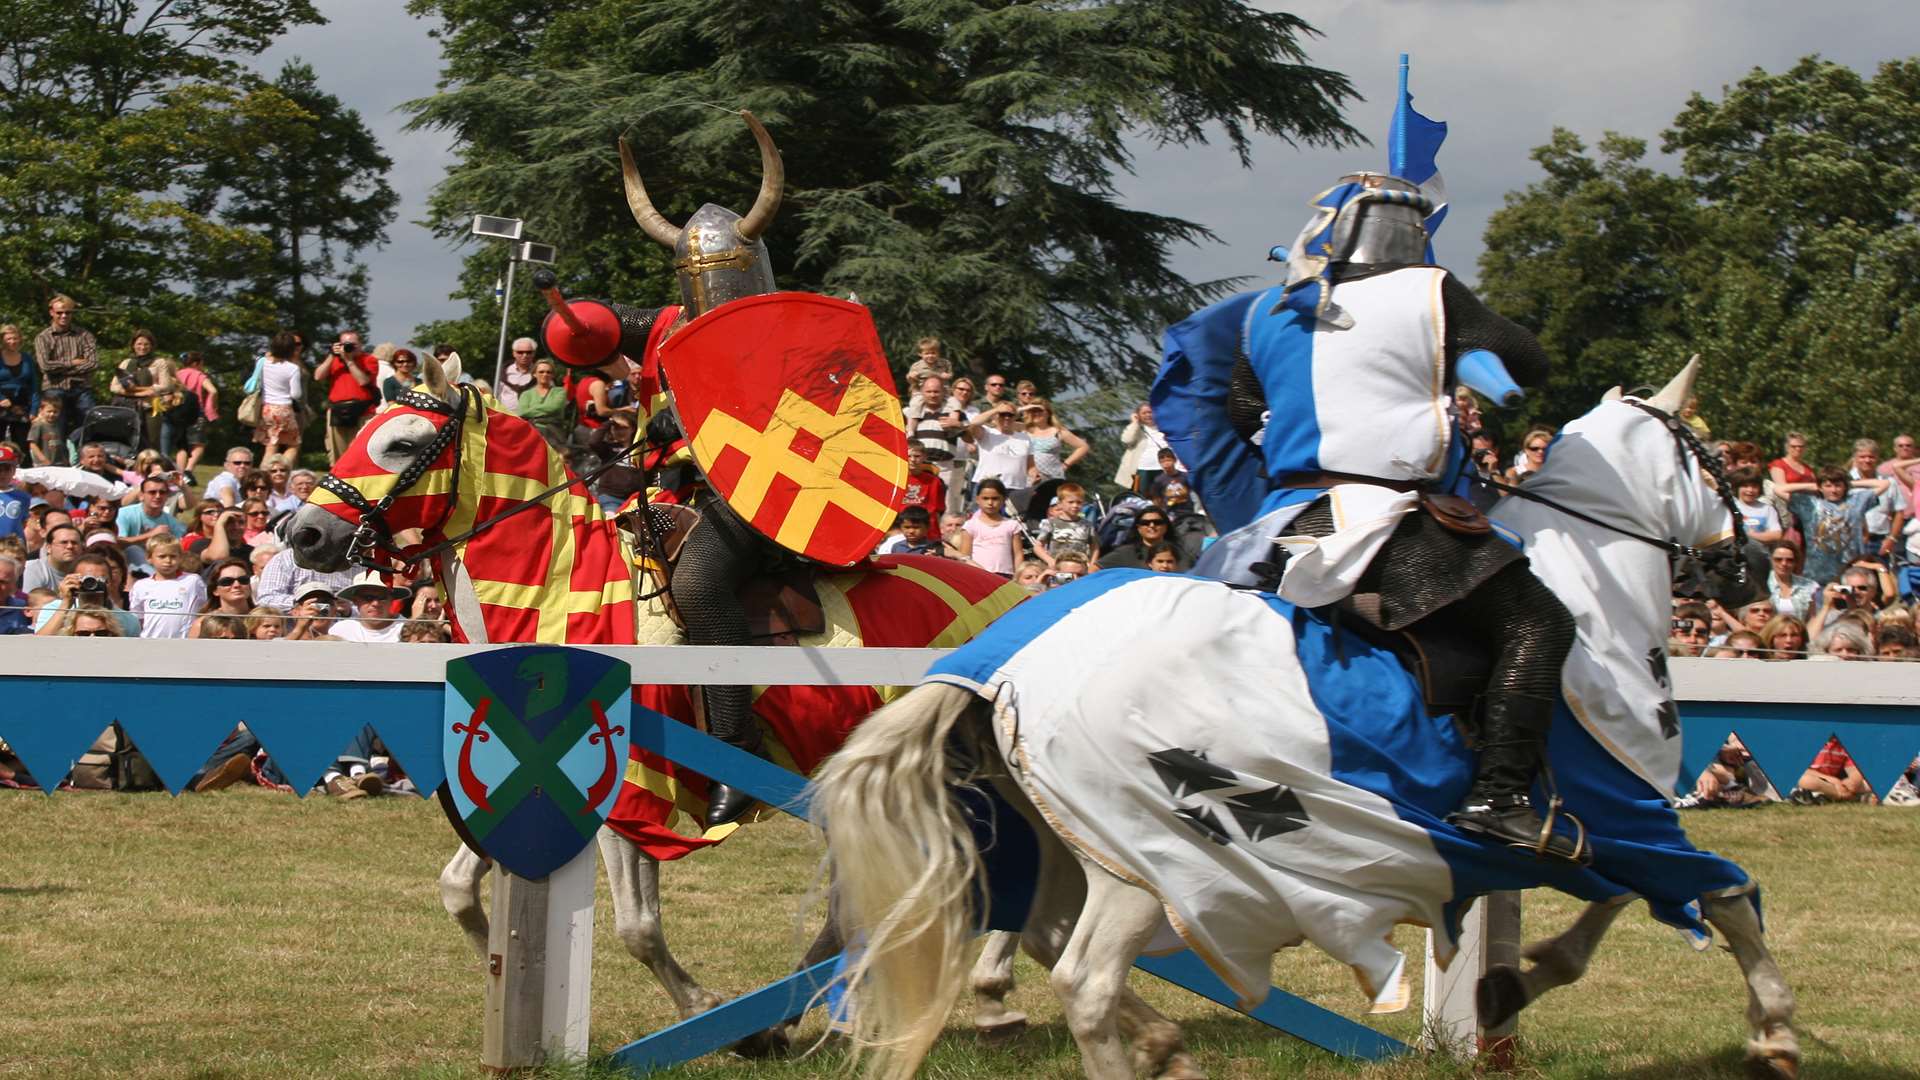 Knights on horseback will be jousting